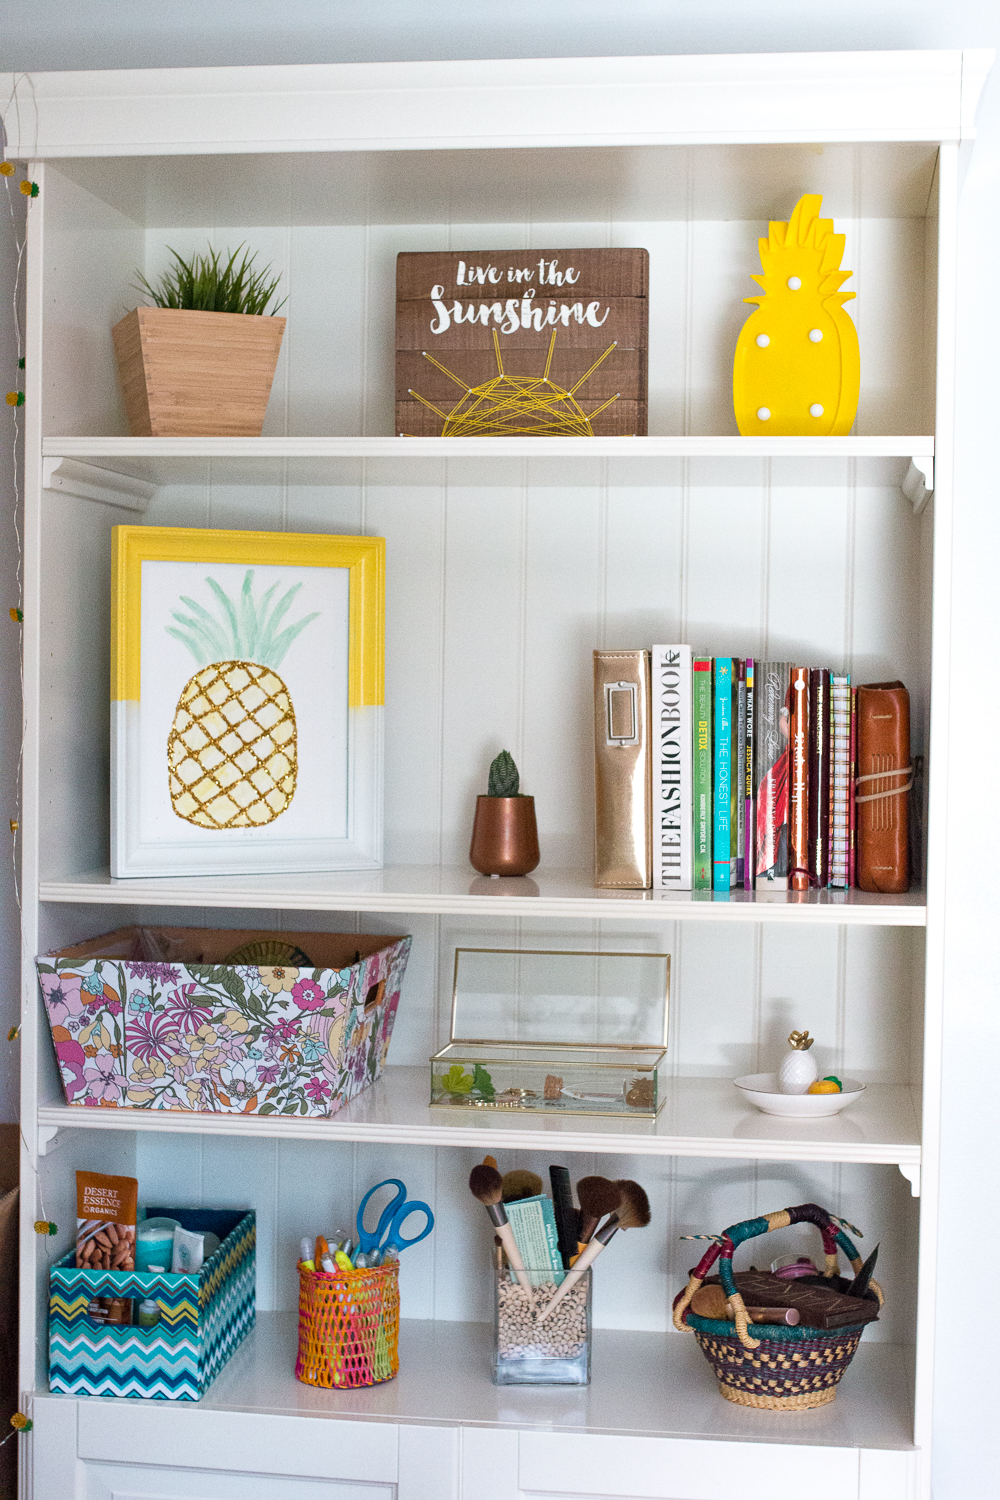 How to Organize a Bookshelf in a Small Space  5 Easy Tips or Organize a Small Bedroom by Sunshine Style a Florida Fashion & Lifestyle Blog | Organization Tips | Small Bedroom Decor | Boho Decor | Tropical Bedroom Decor #decor #organize #organization #bedroom #decorate